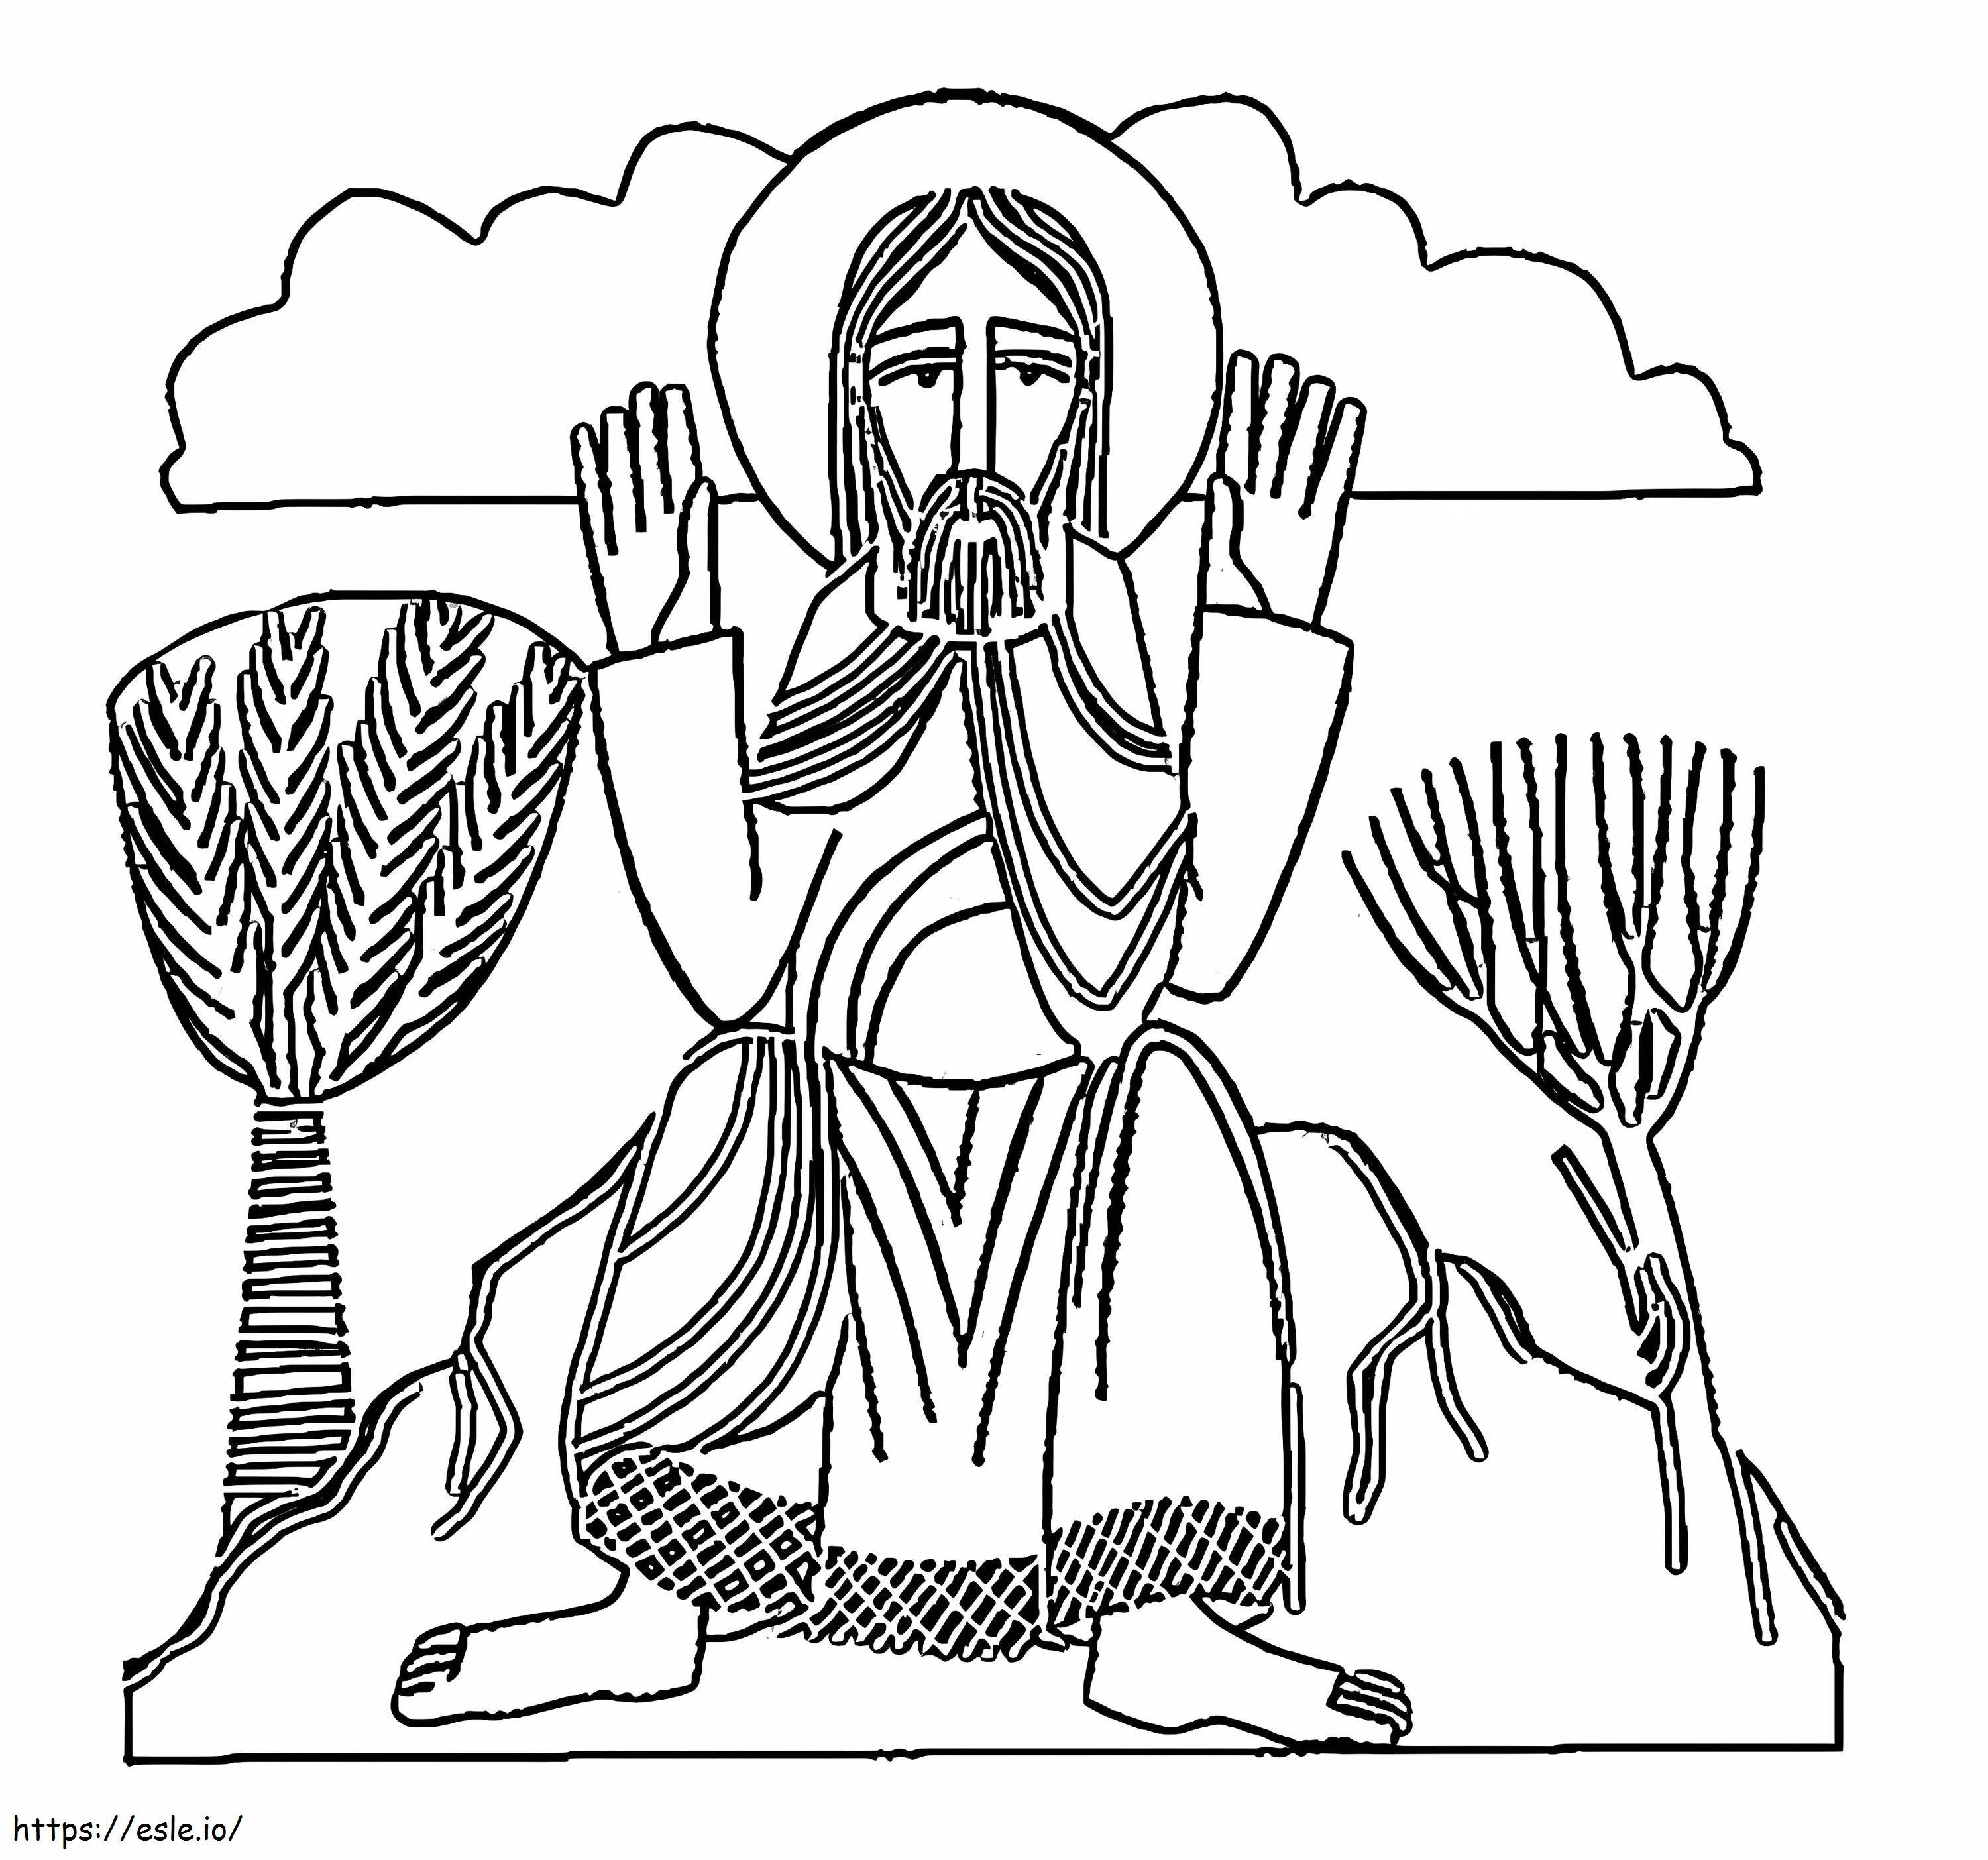 All Saints Day 4 coloring page